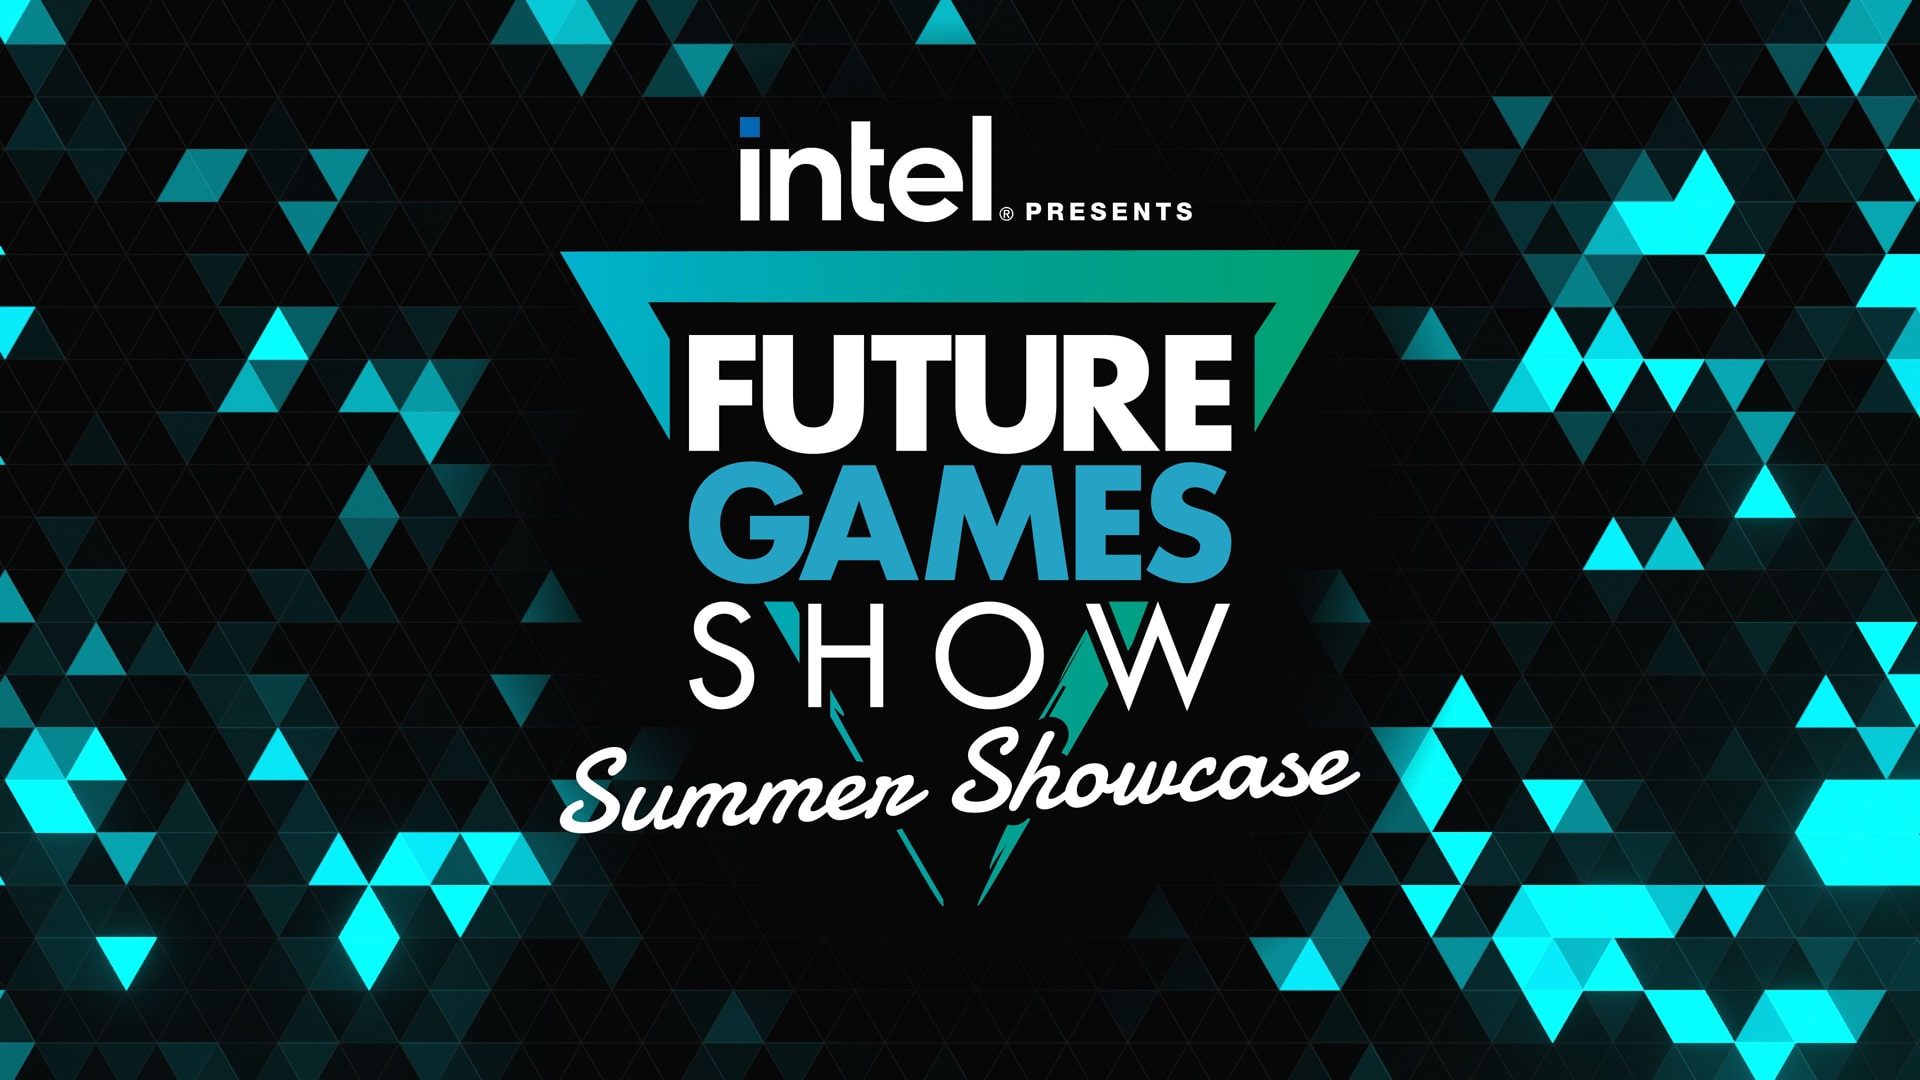 Official poster for Future Games Show 2020, showcasing event highlights